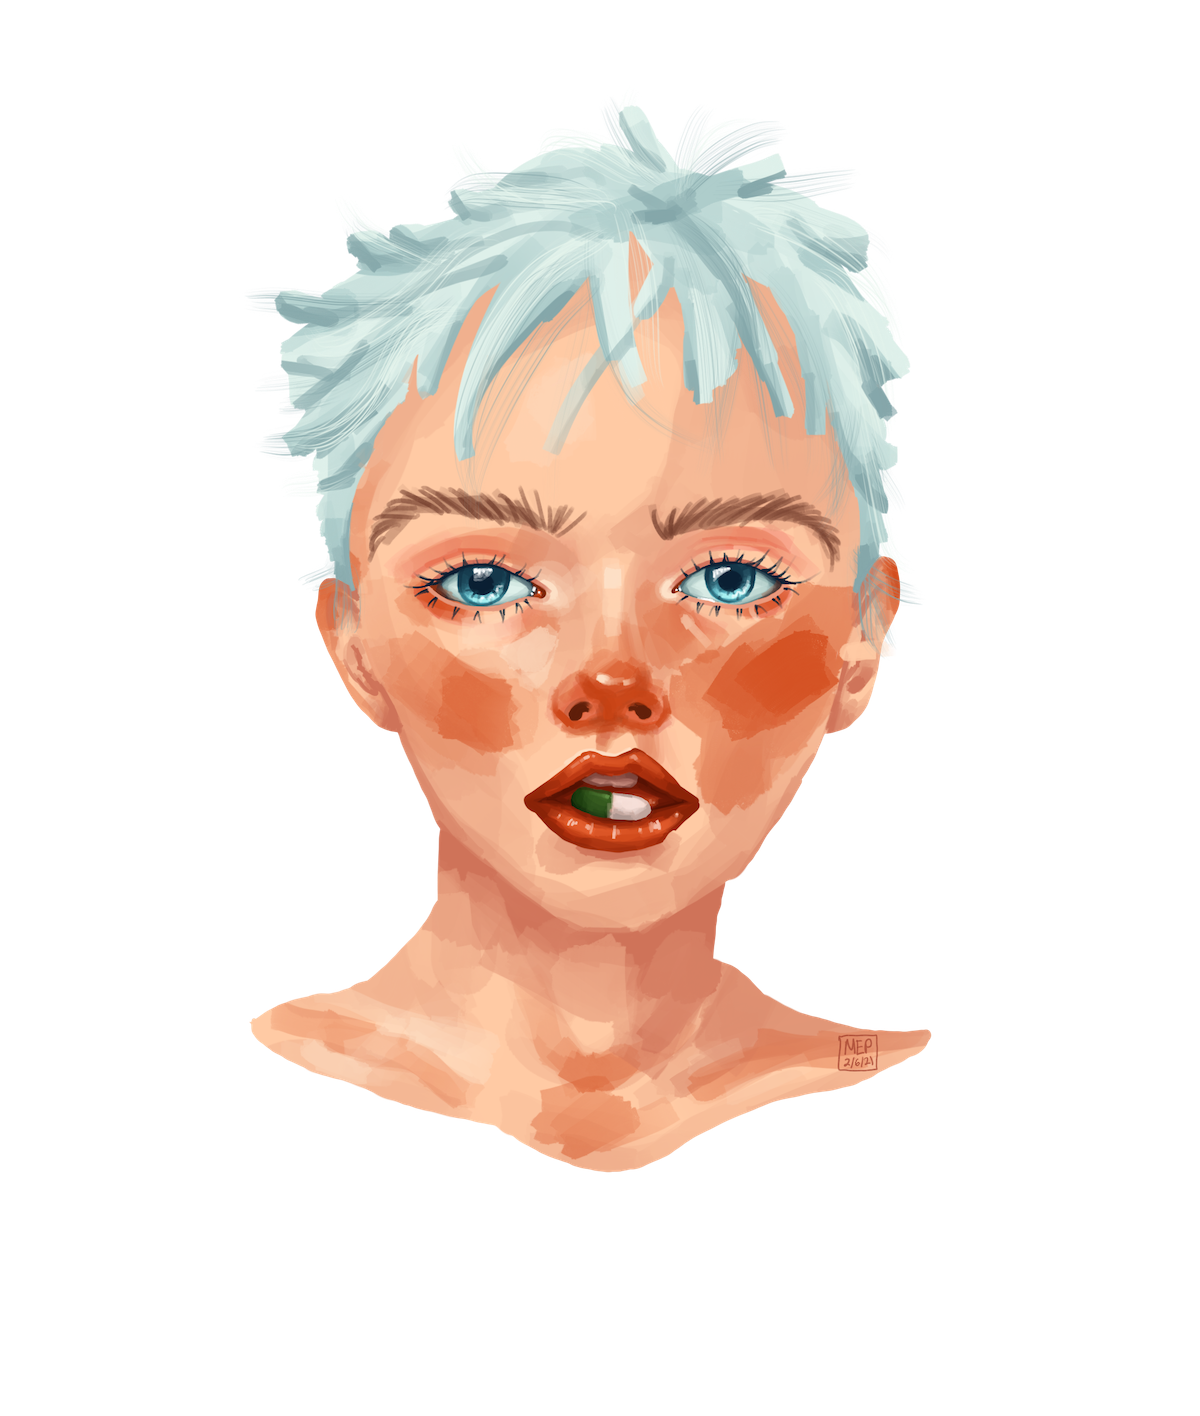 a digital portrait painting of a person with short blue grey hair and a pill in their mouth